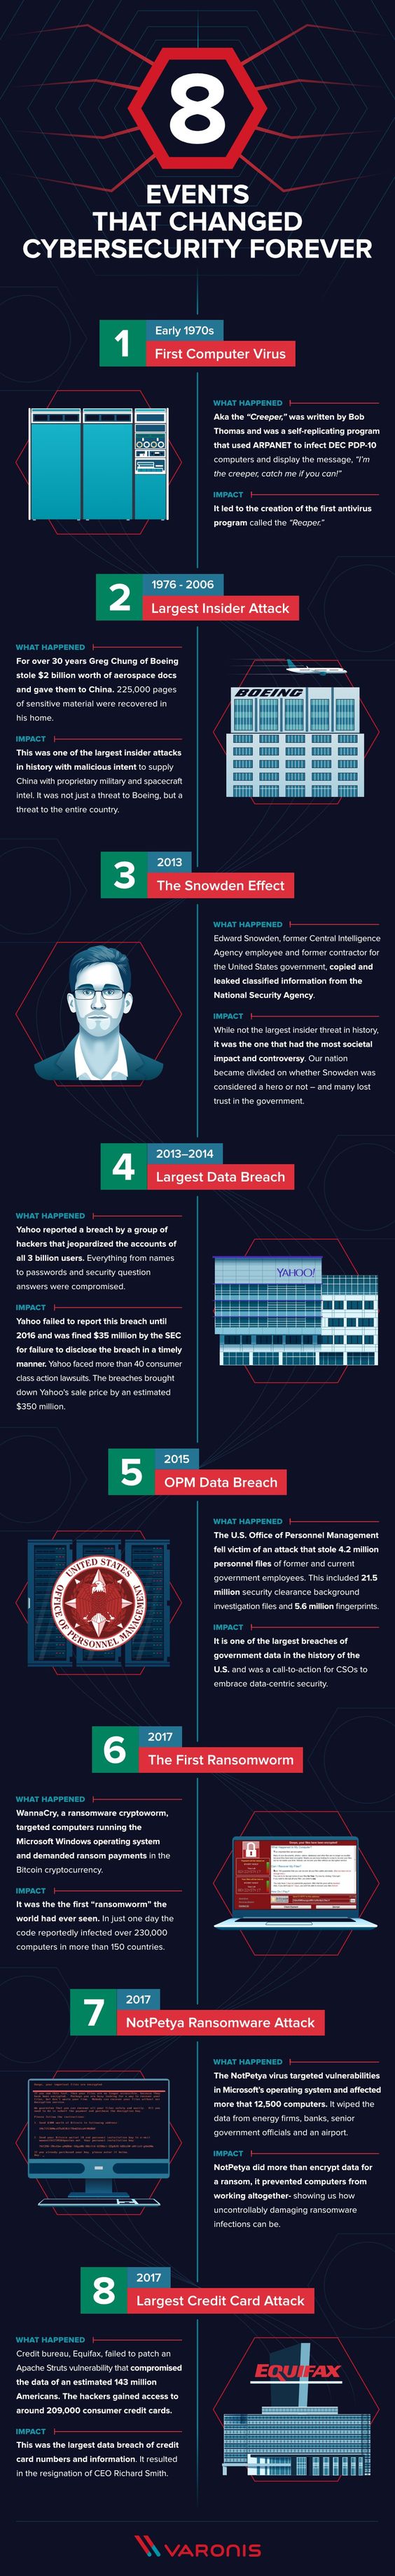 RSN™ Insights: Top 8 Events That Changed Cybersecurity [Infographic]